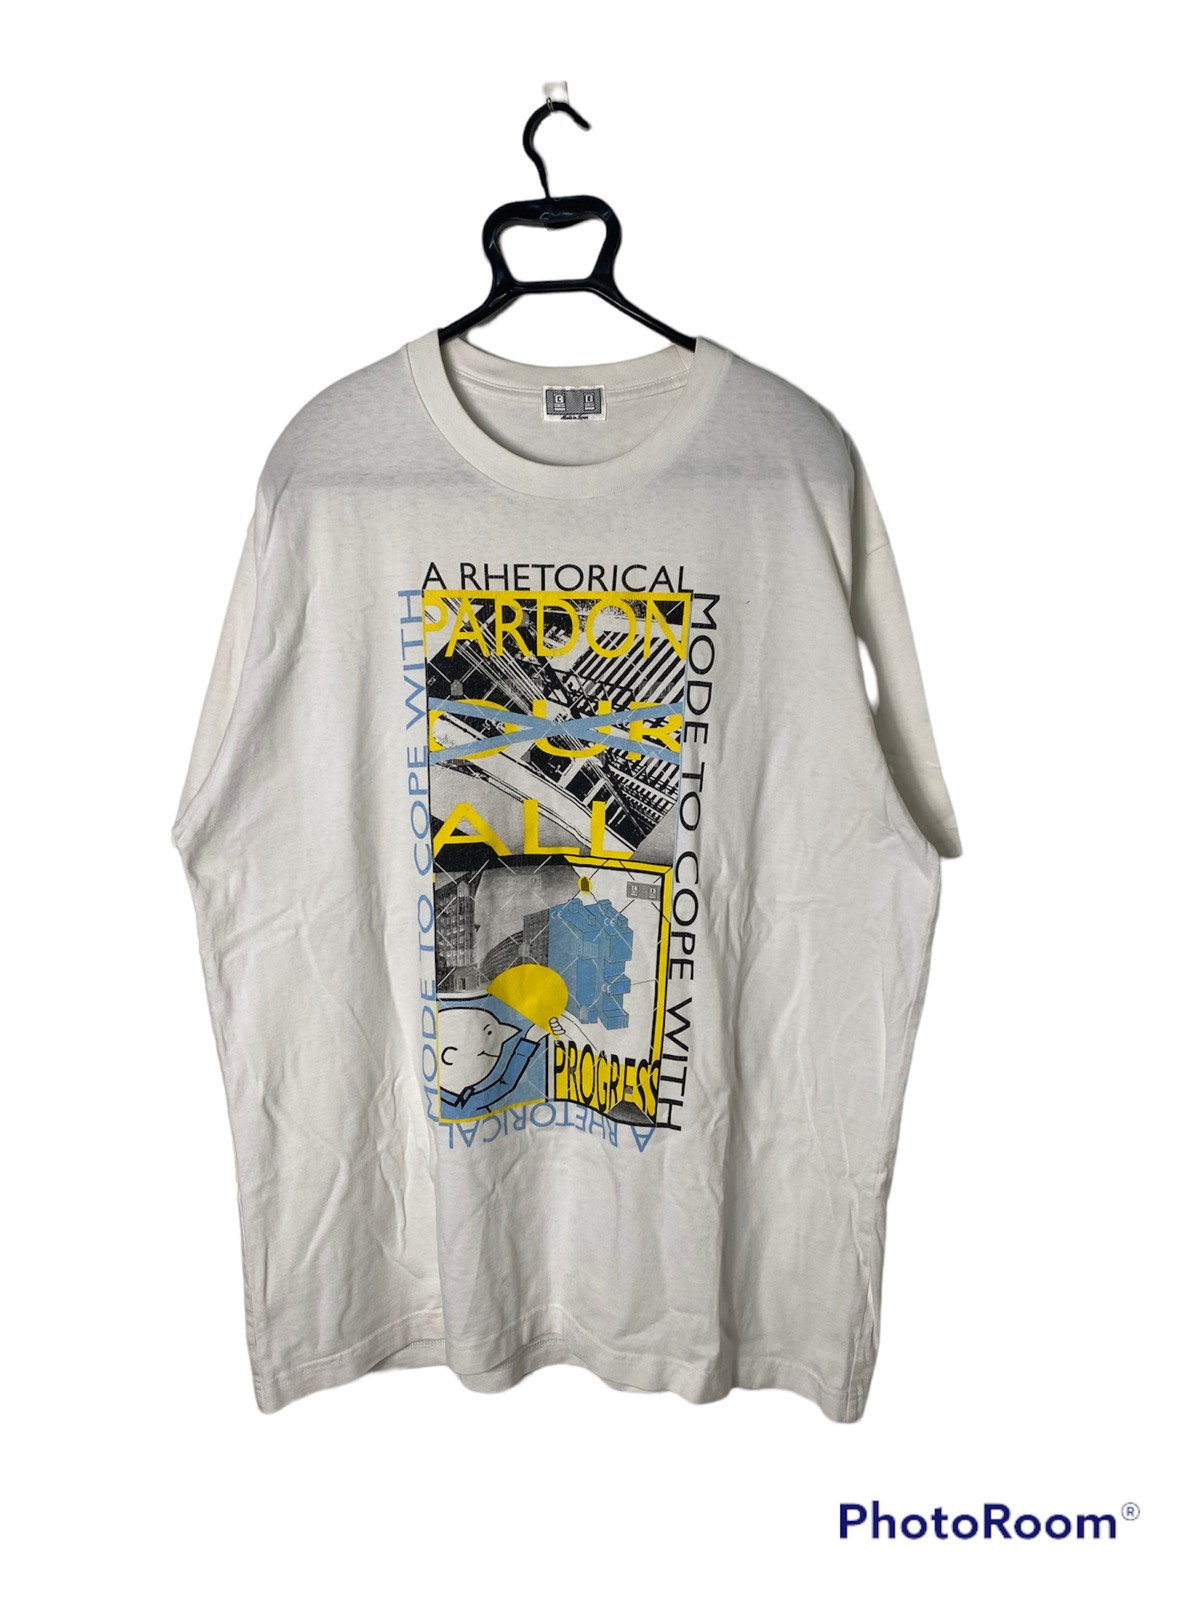 Cav Empt Mode To Cope With A Pethorical Tee - 1